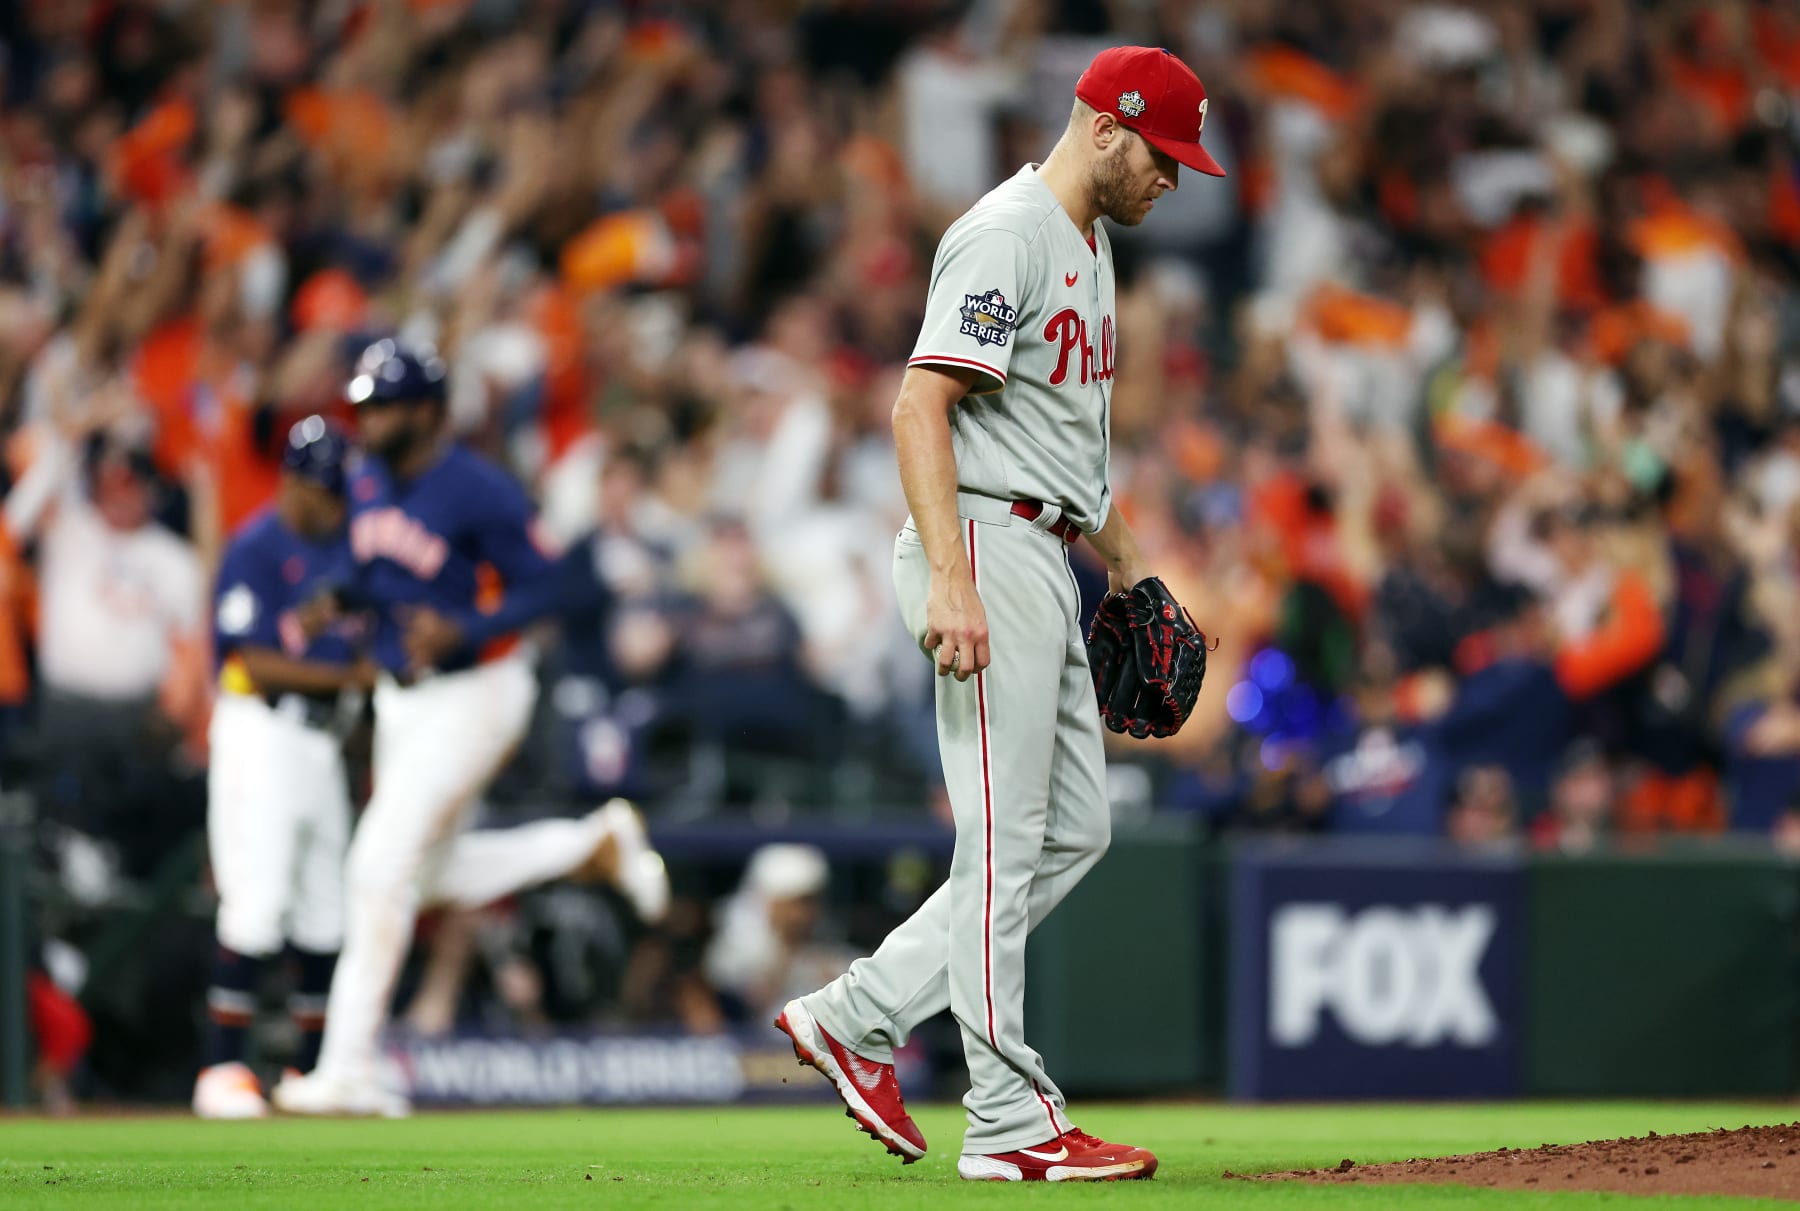 World Series Game 5 score, highlights: Astros vs Phillies